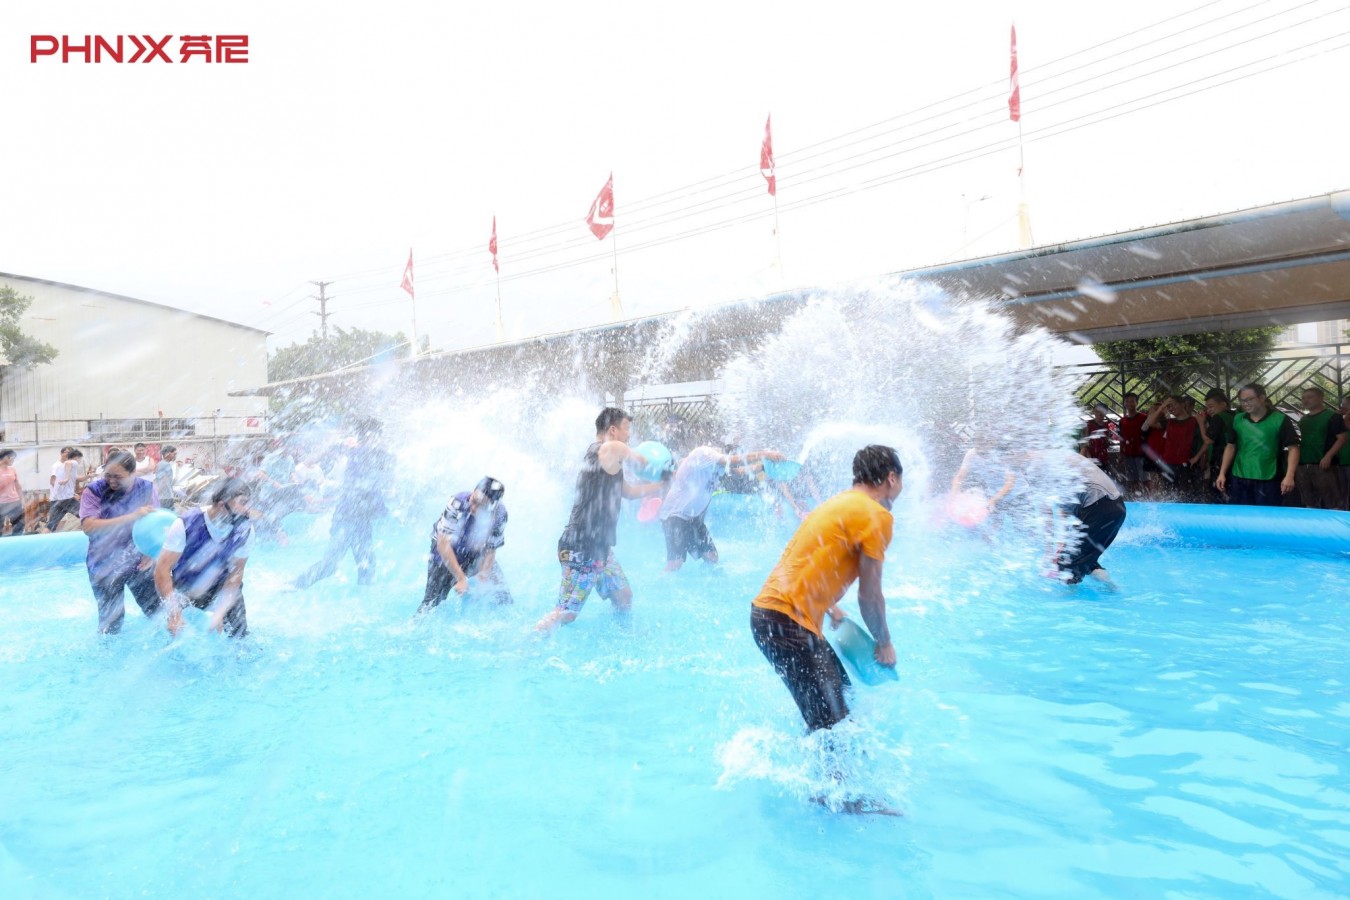 Fun Games and Family Get-together——The Water Fun Party in PHNIX Has It All